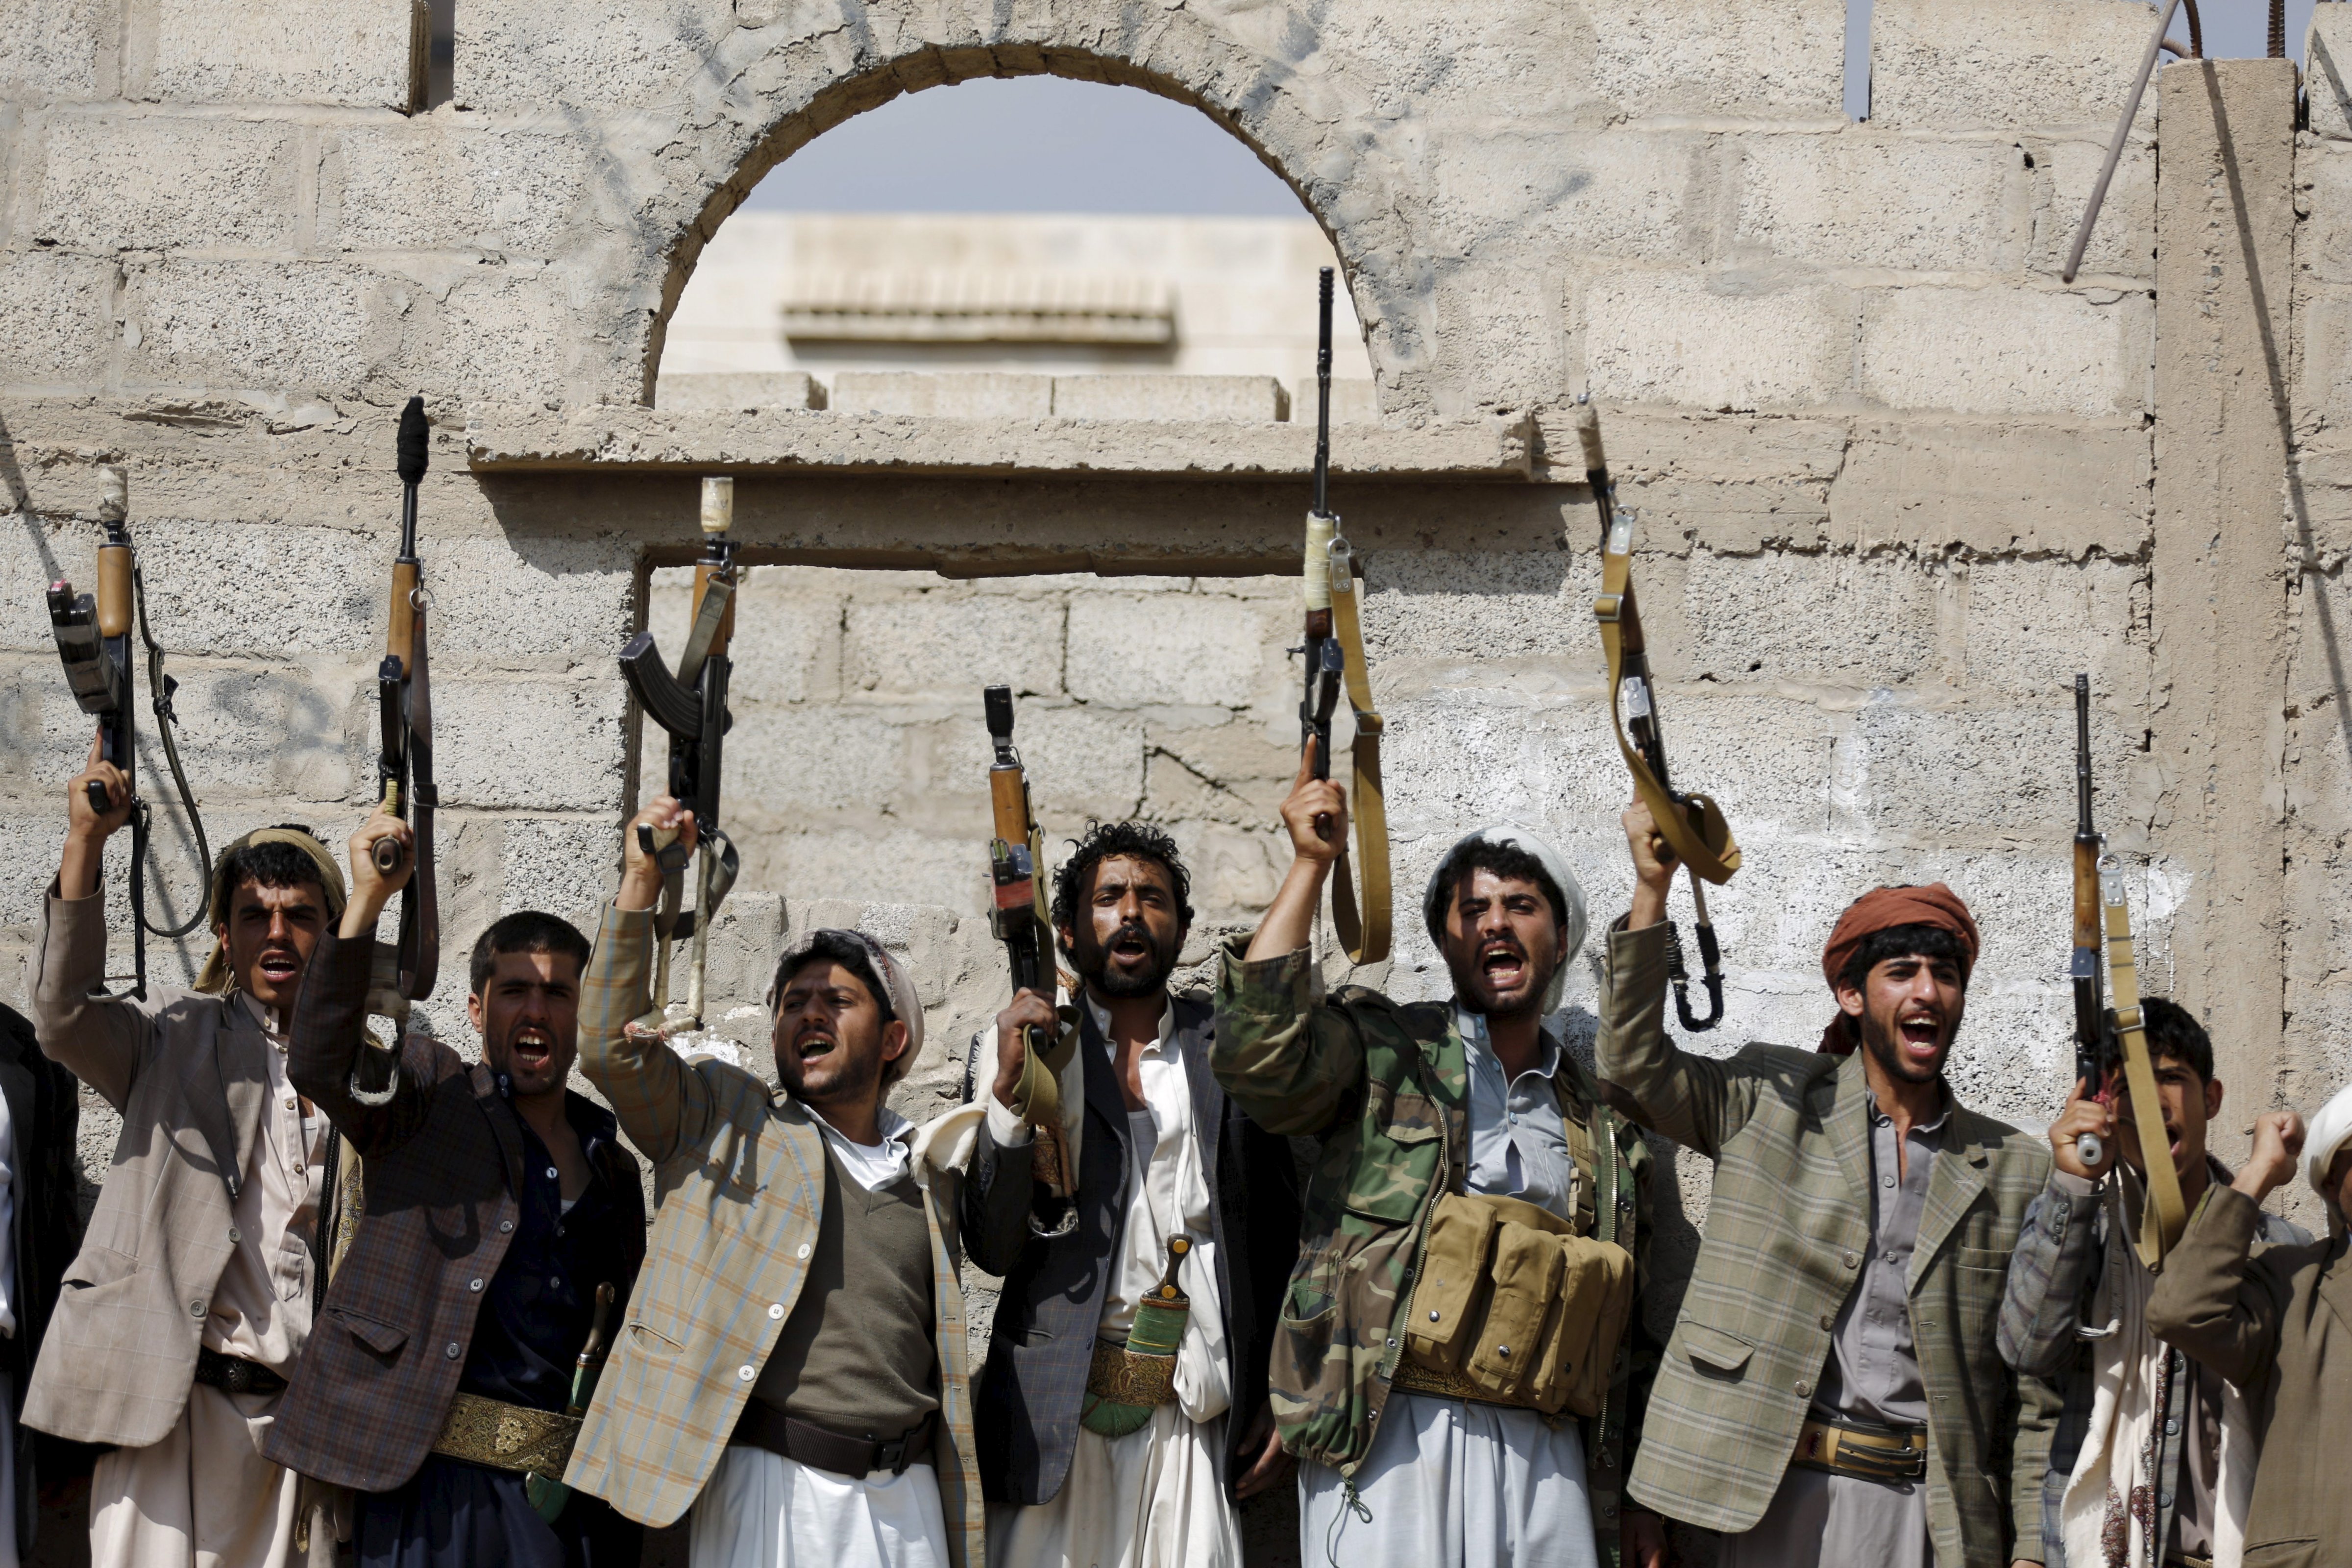 Tribesmen loyal to the Houthi forces shout slogans and raise their weapons during a gathering in Yemen's capital Sana'a on Dec. 15, 2015 (Khaled Abdullah—Reuters)